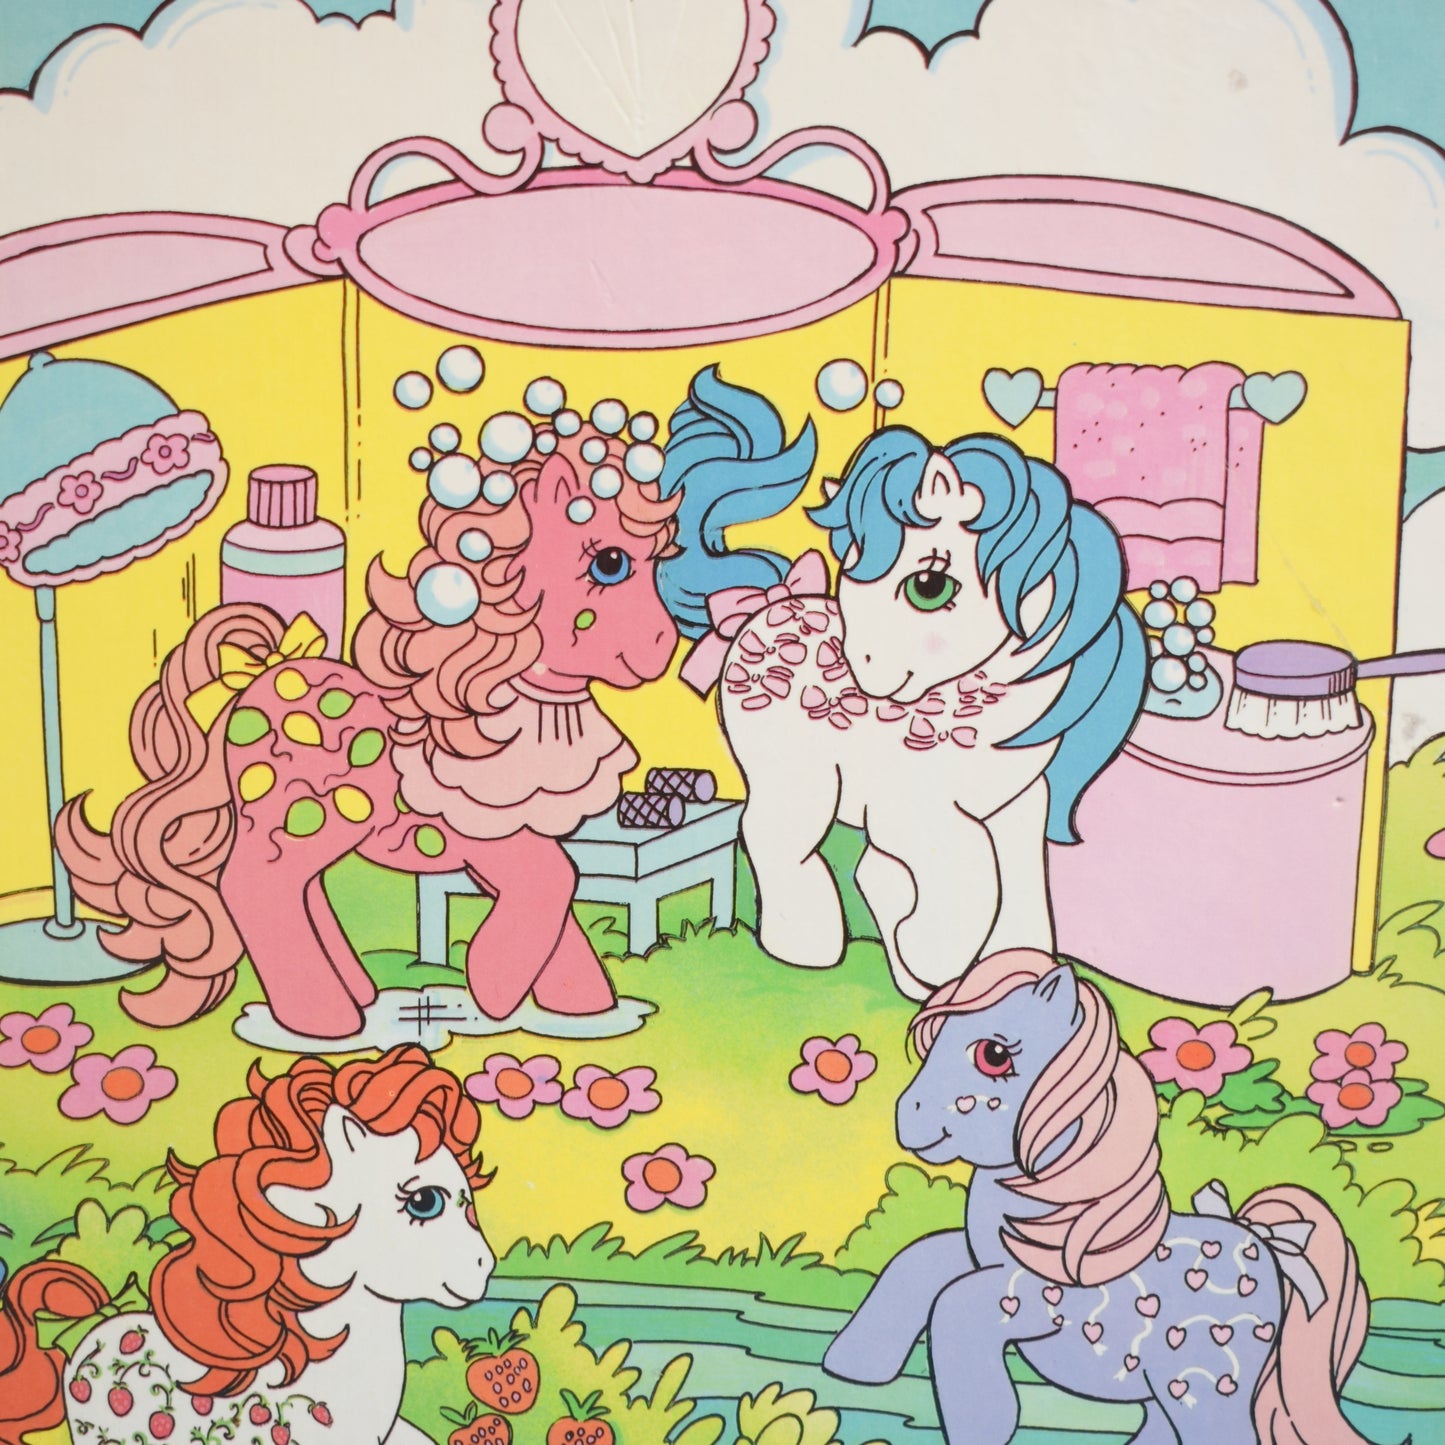 Vintage 1980s My Little Pony- Favourite Stories